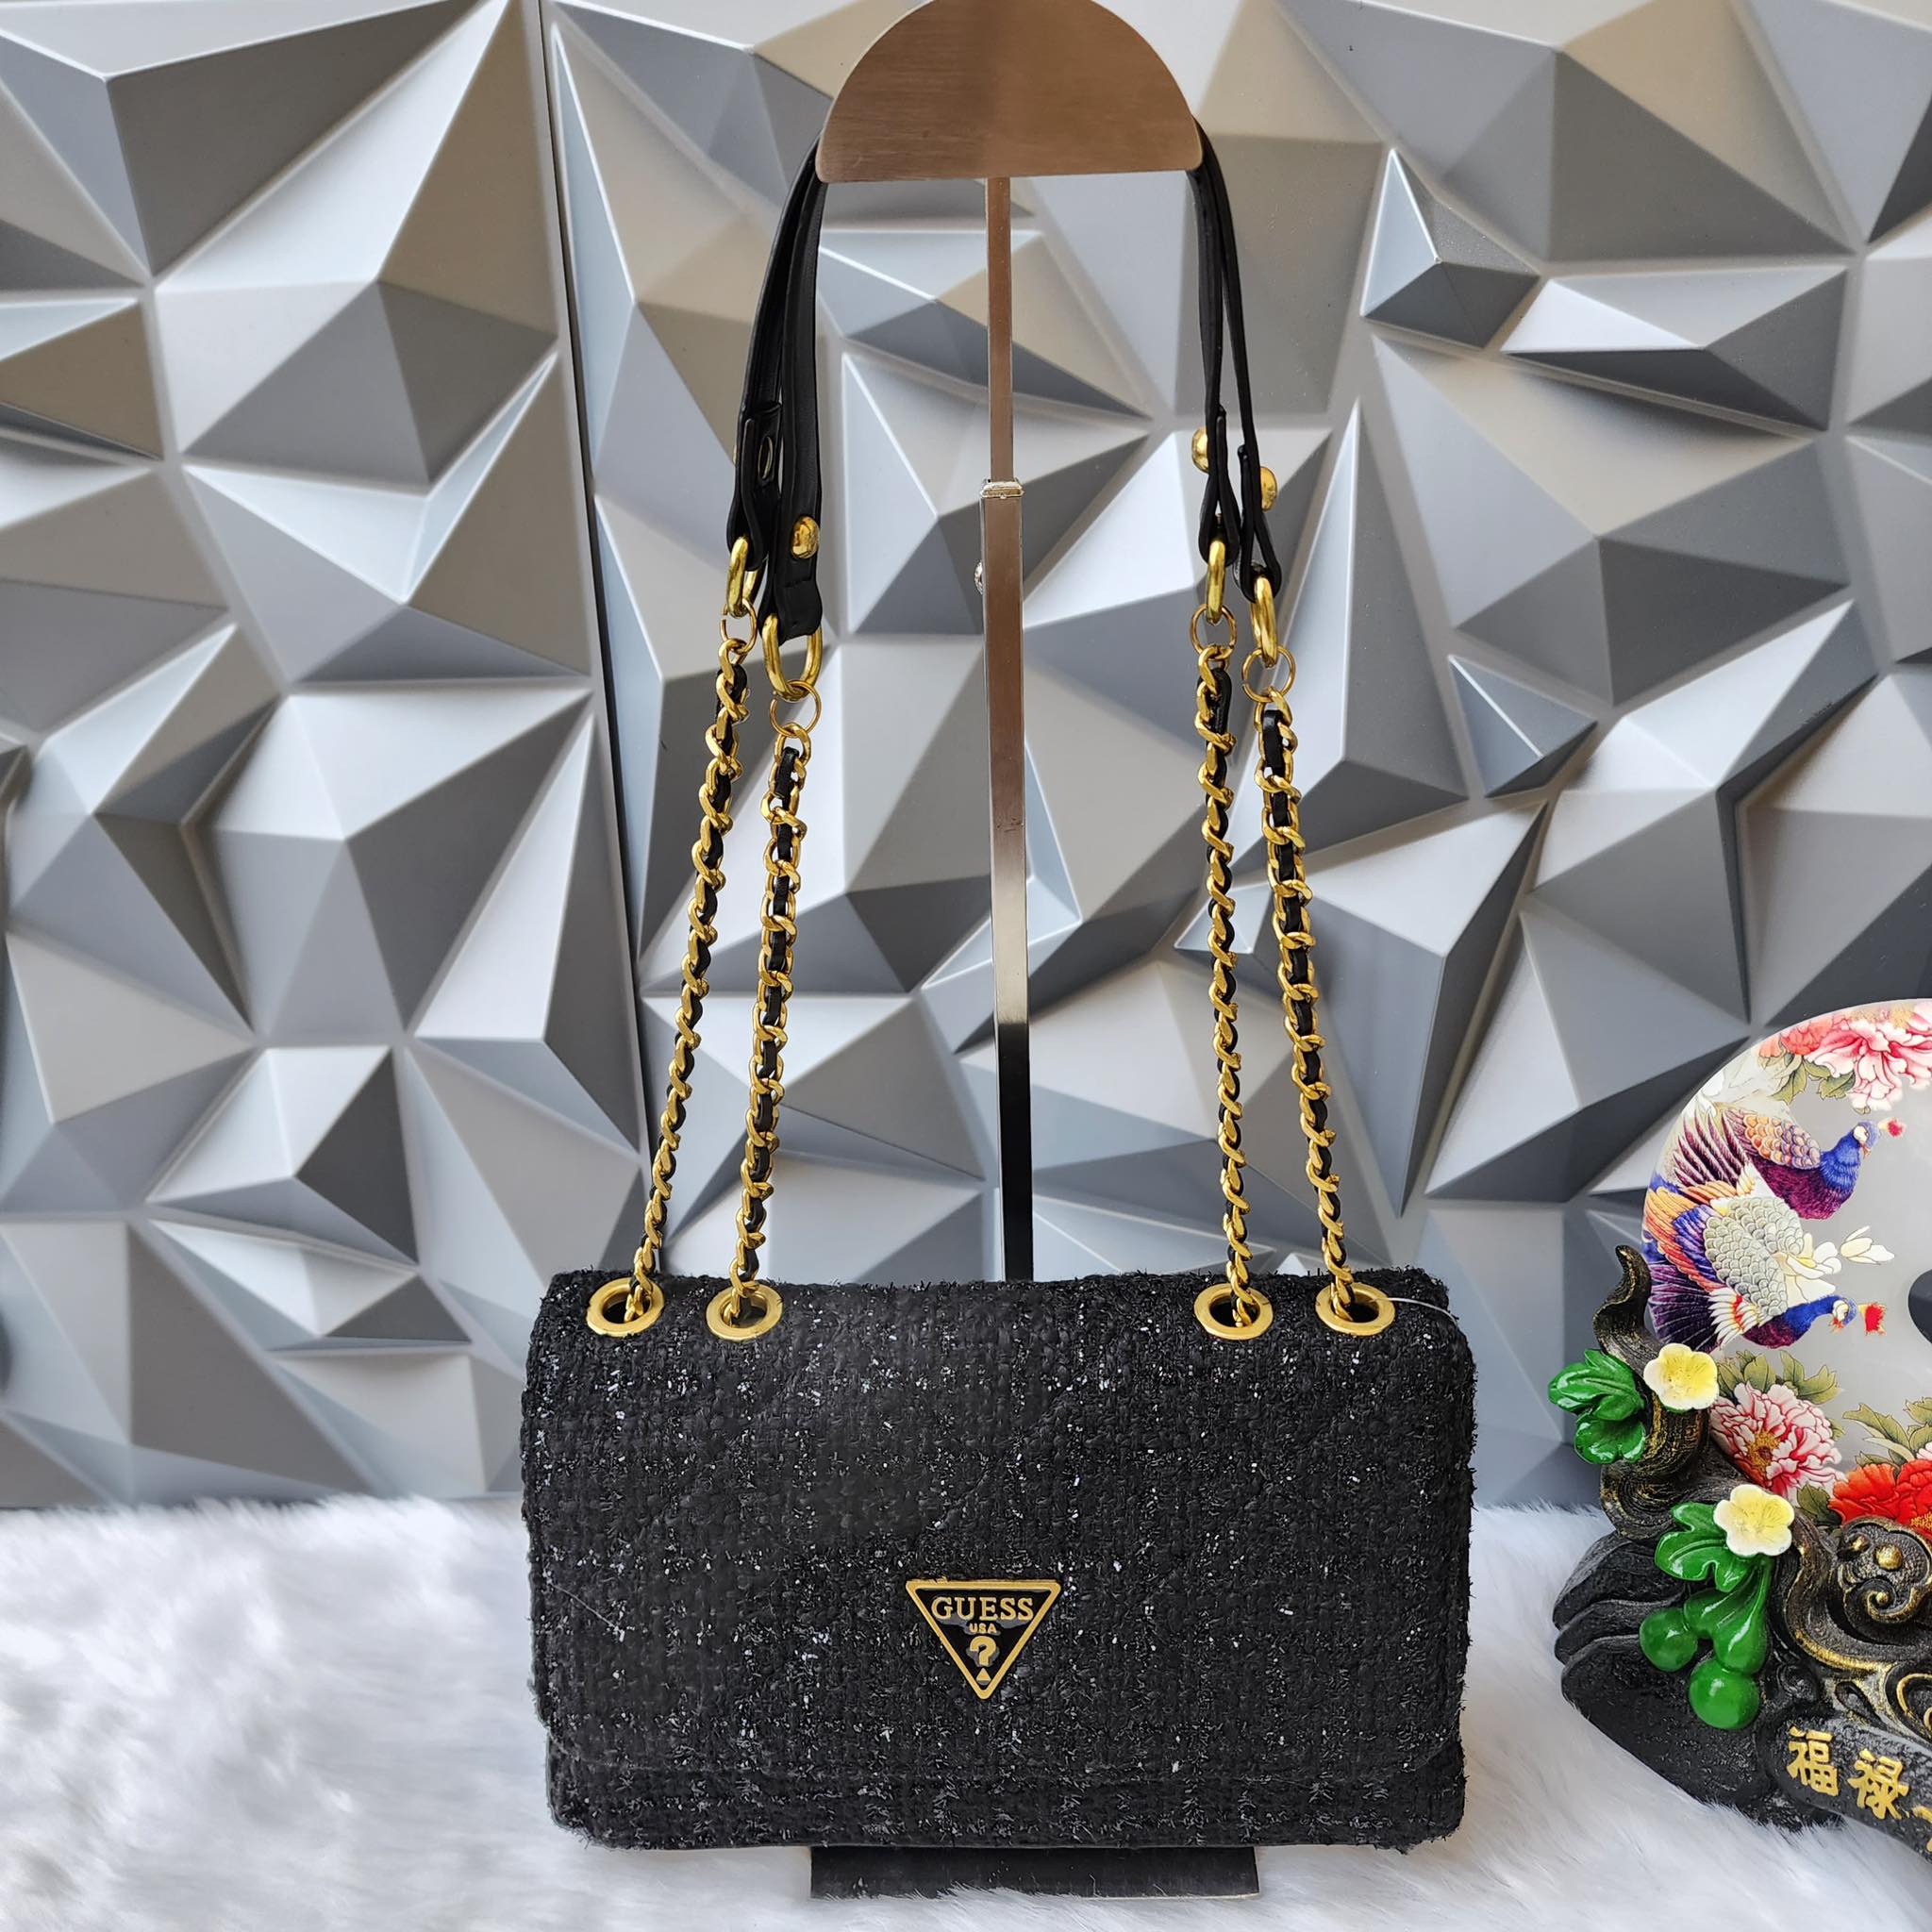 Guess Cessily Shoulder Bag and Trotter Tweed TNM Black Multi